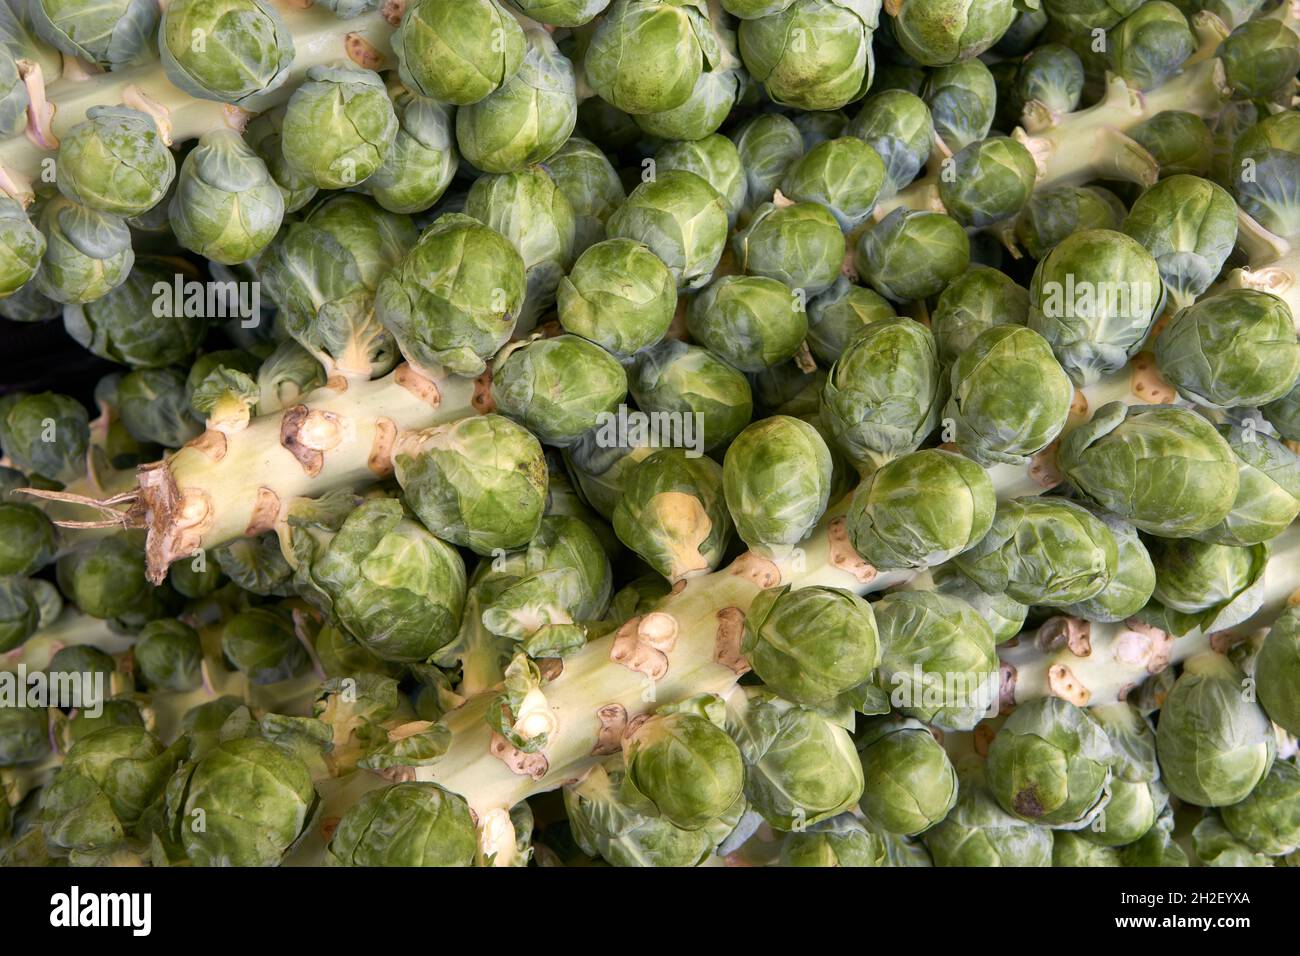 Closeup of green Brussels Sprouts stalks for sale in a market Stock Photo